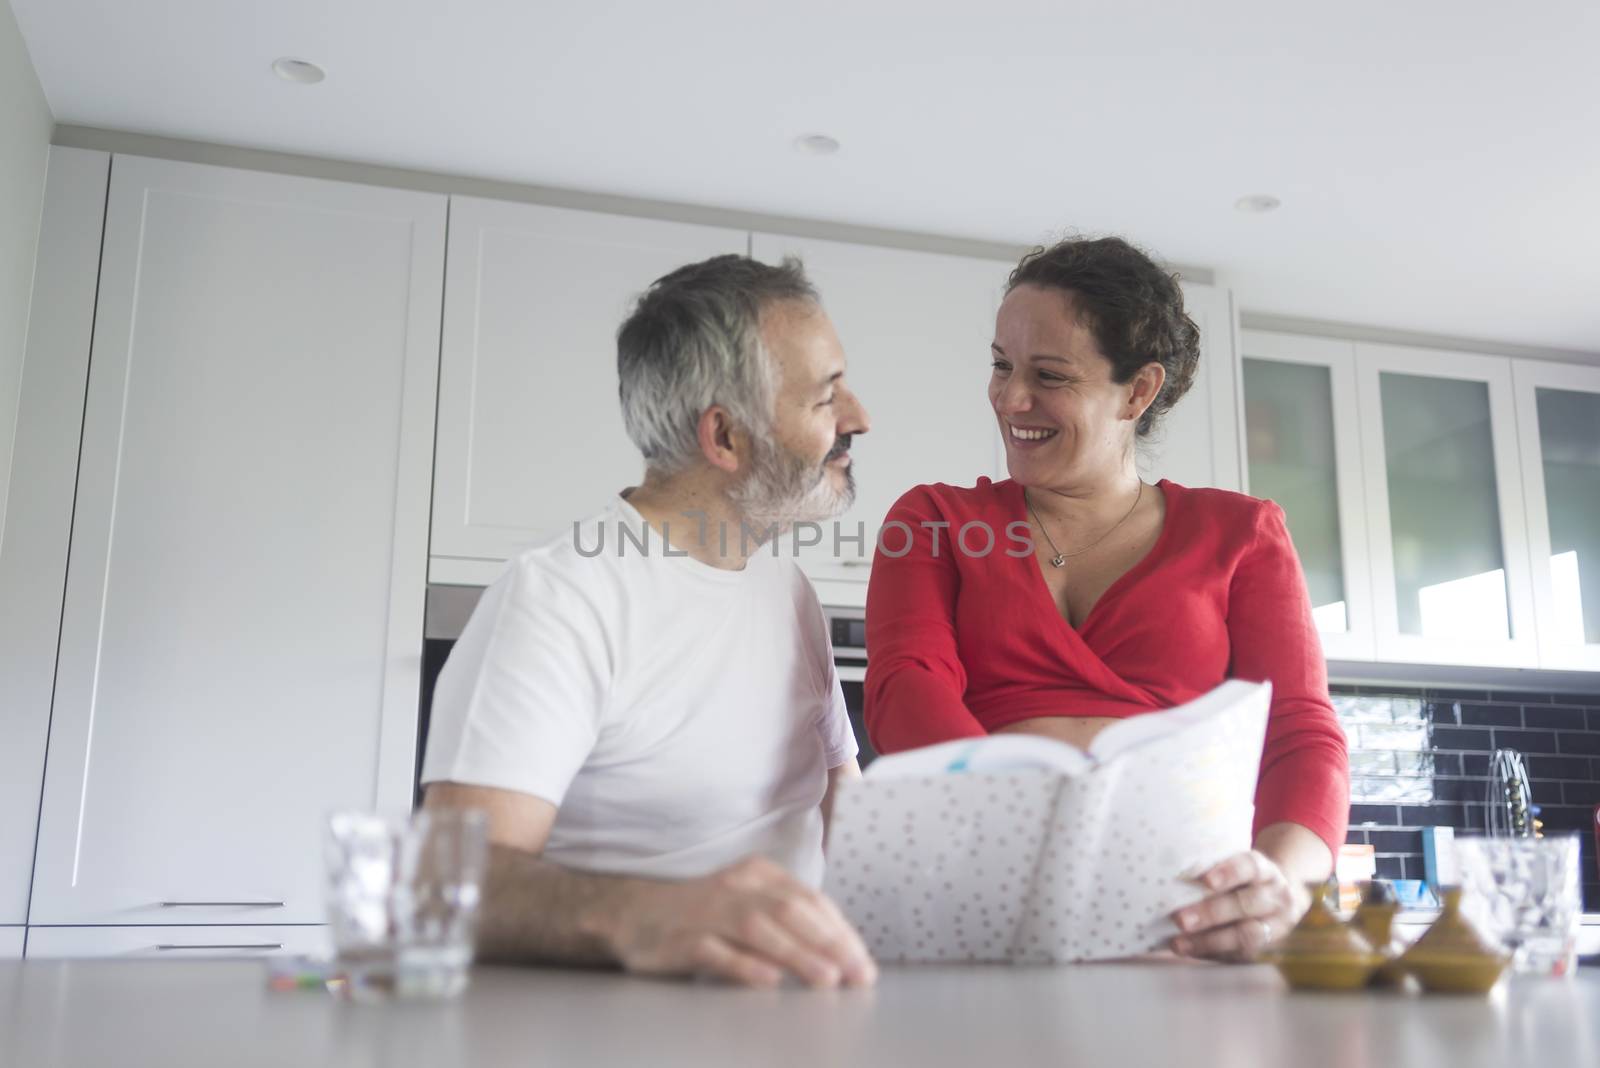 Smiling couple consulting a book at the kitchen.